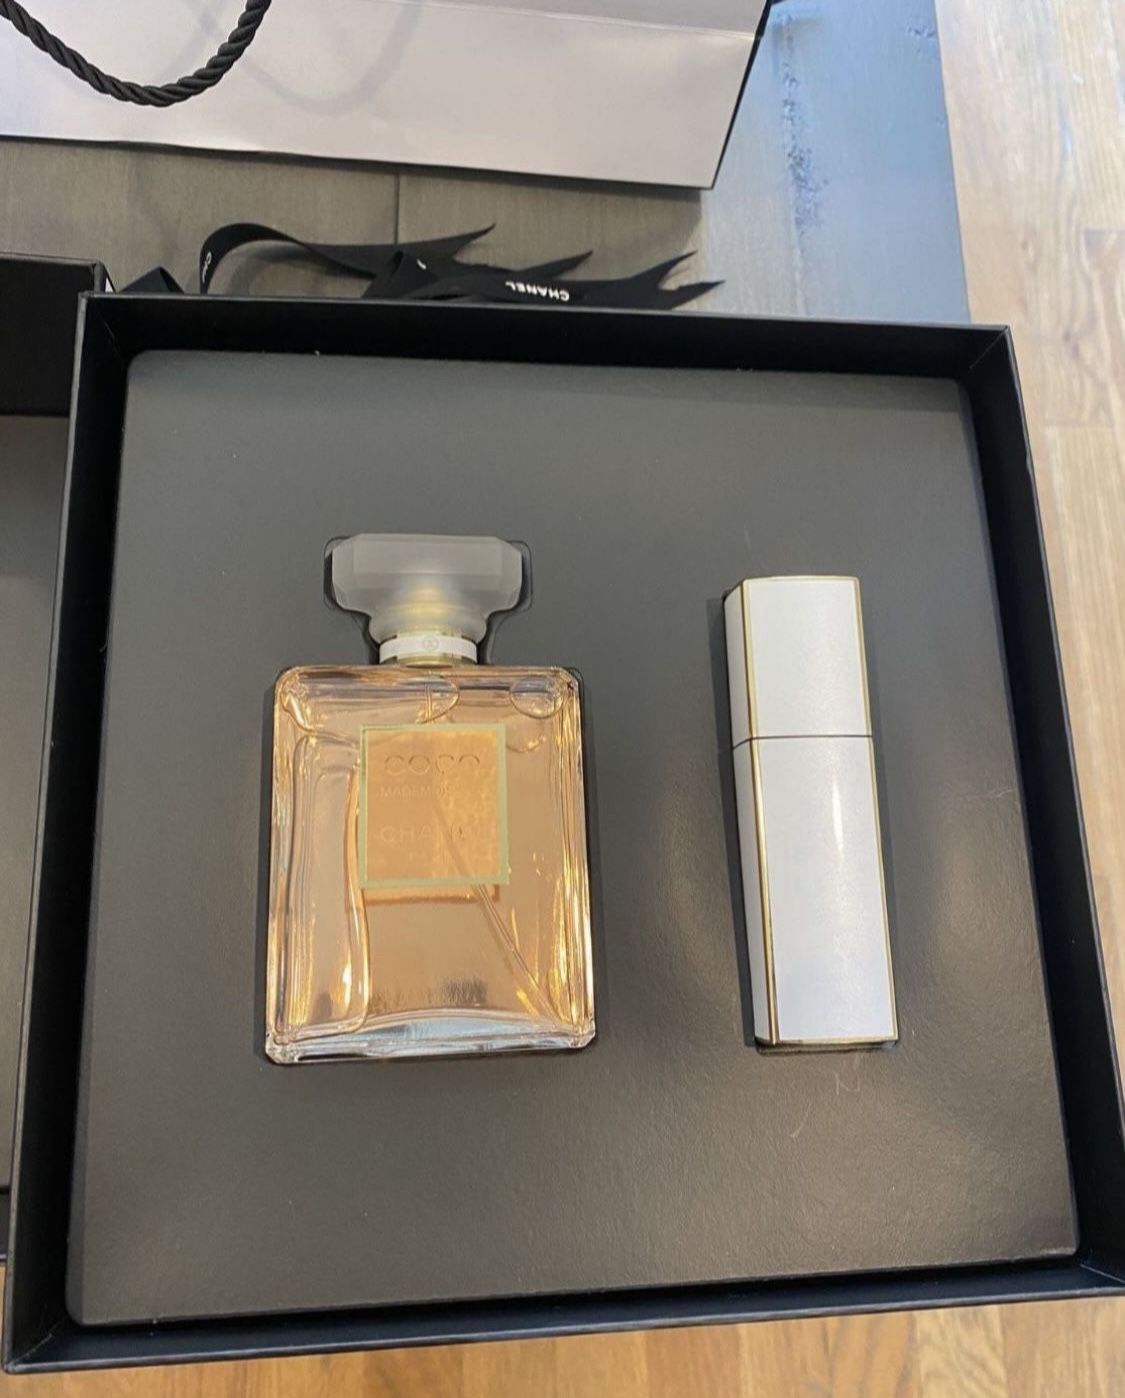 What is the best way to get free perfume samples by mail? - Quora